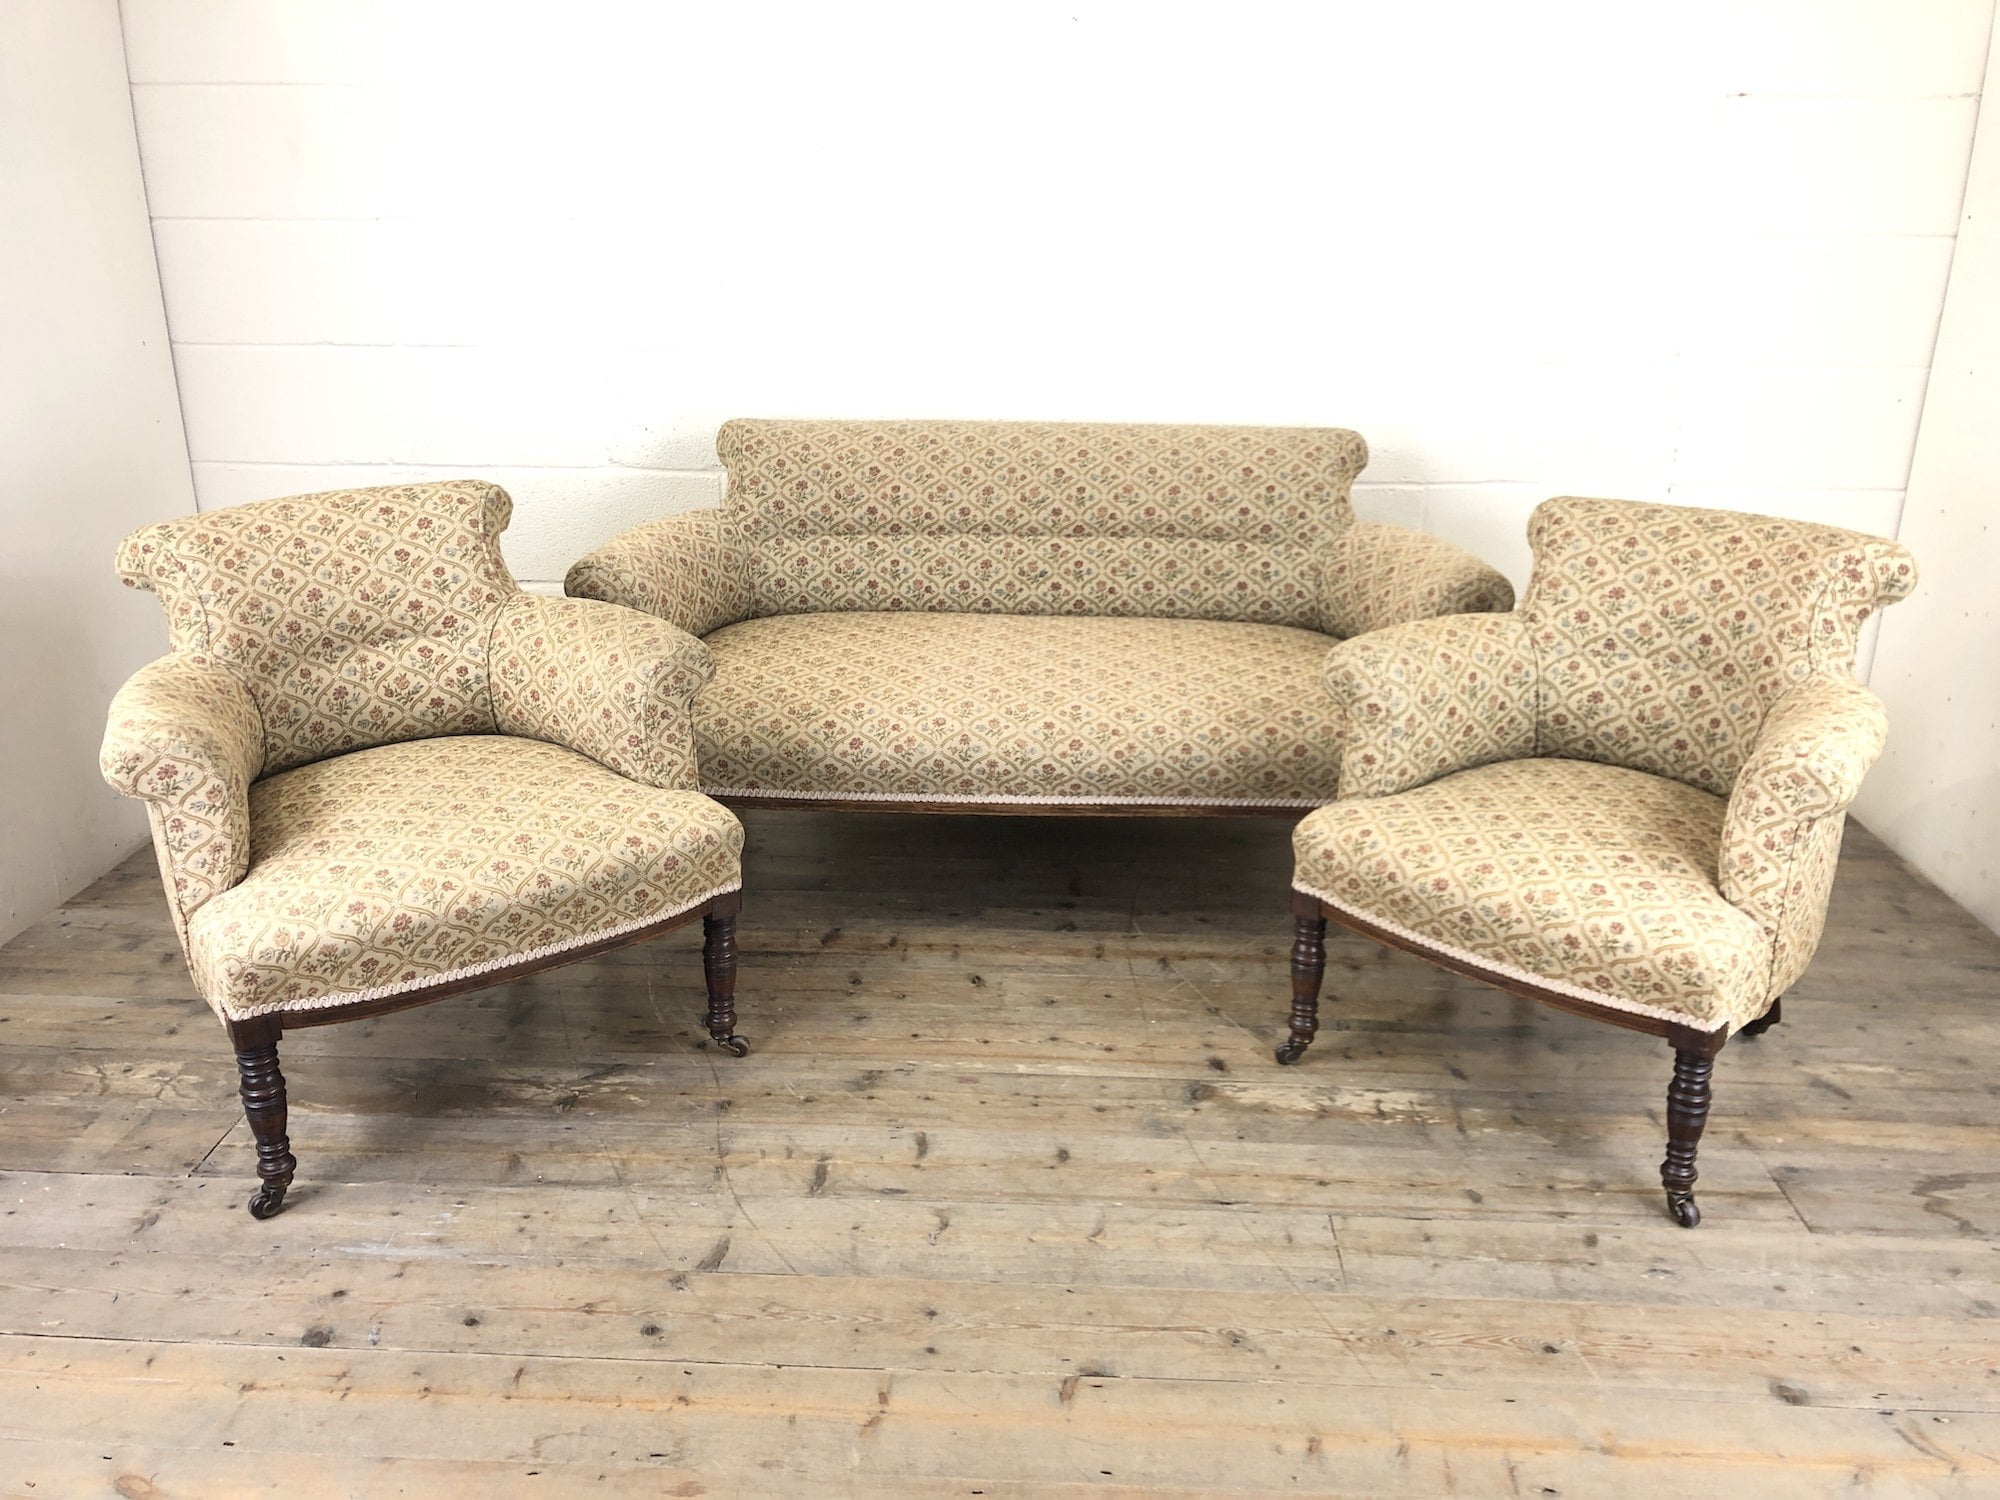 Victorian Three Piece Suite with Upholstery